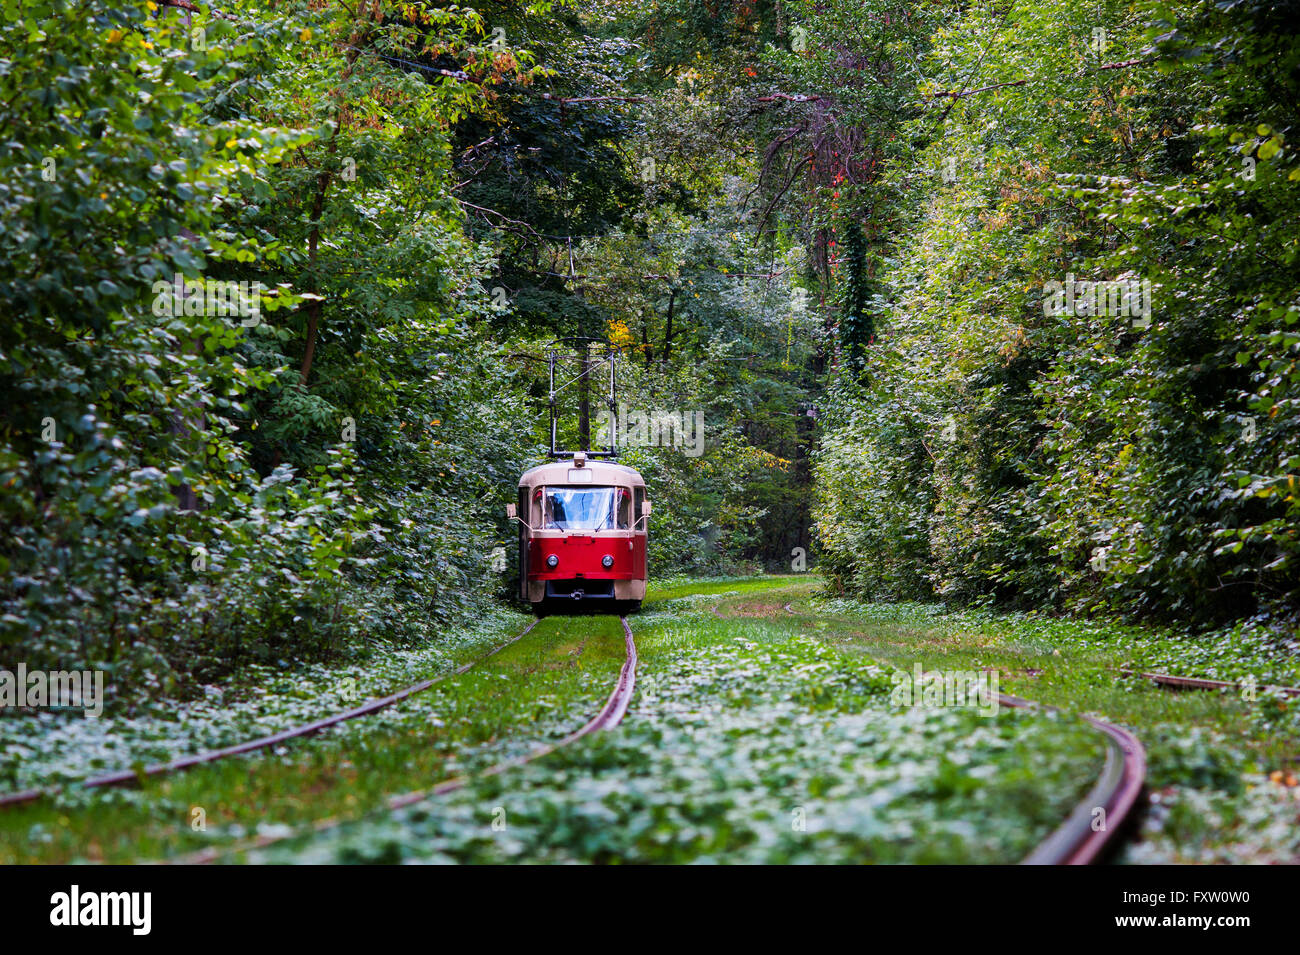 red tram rides through the trees in park Stock Photo